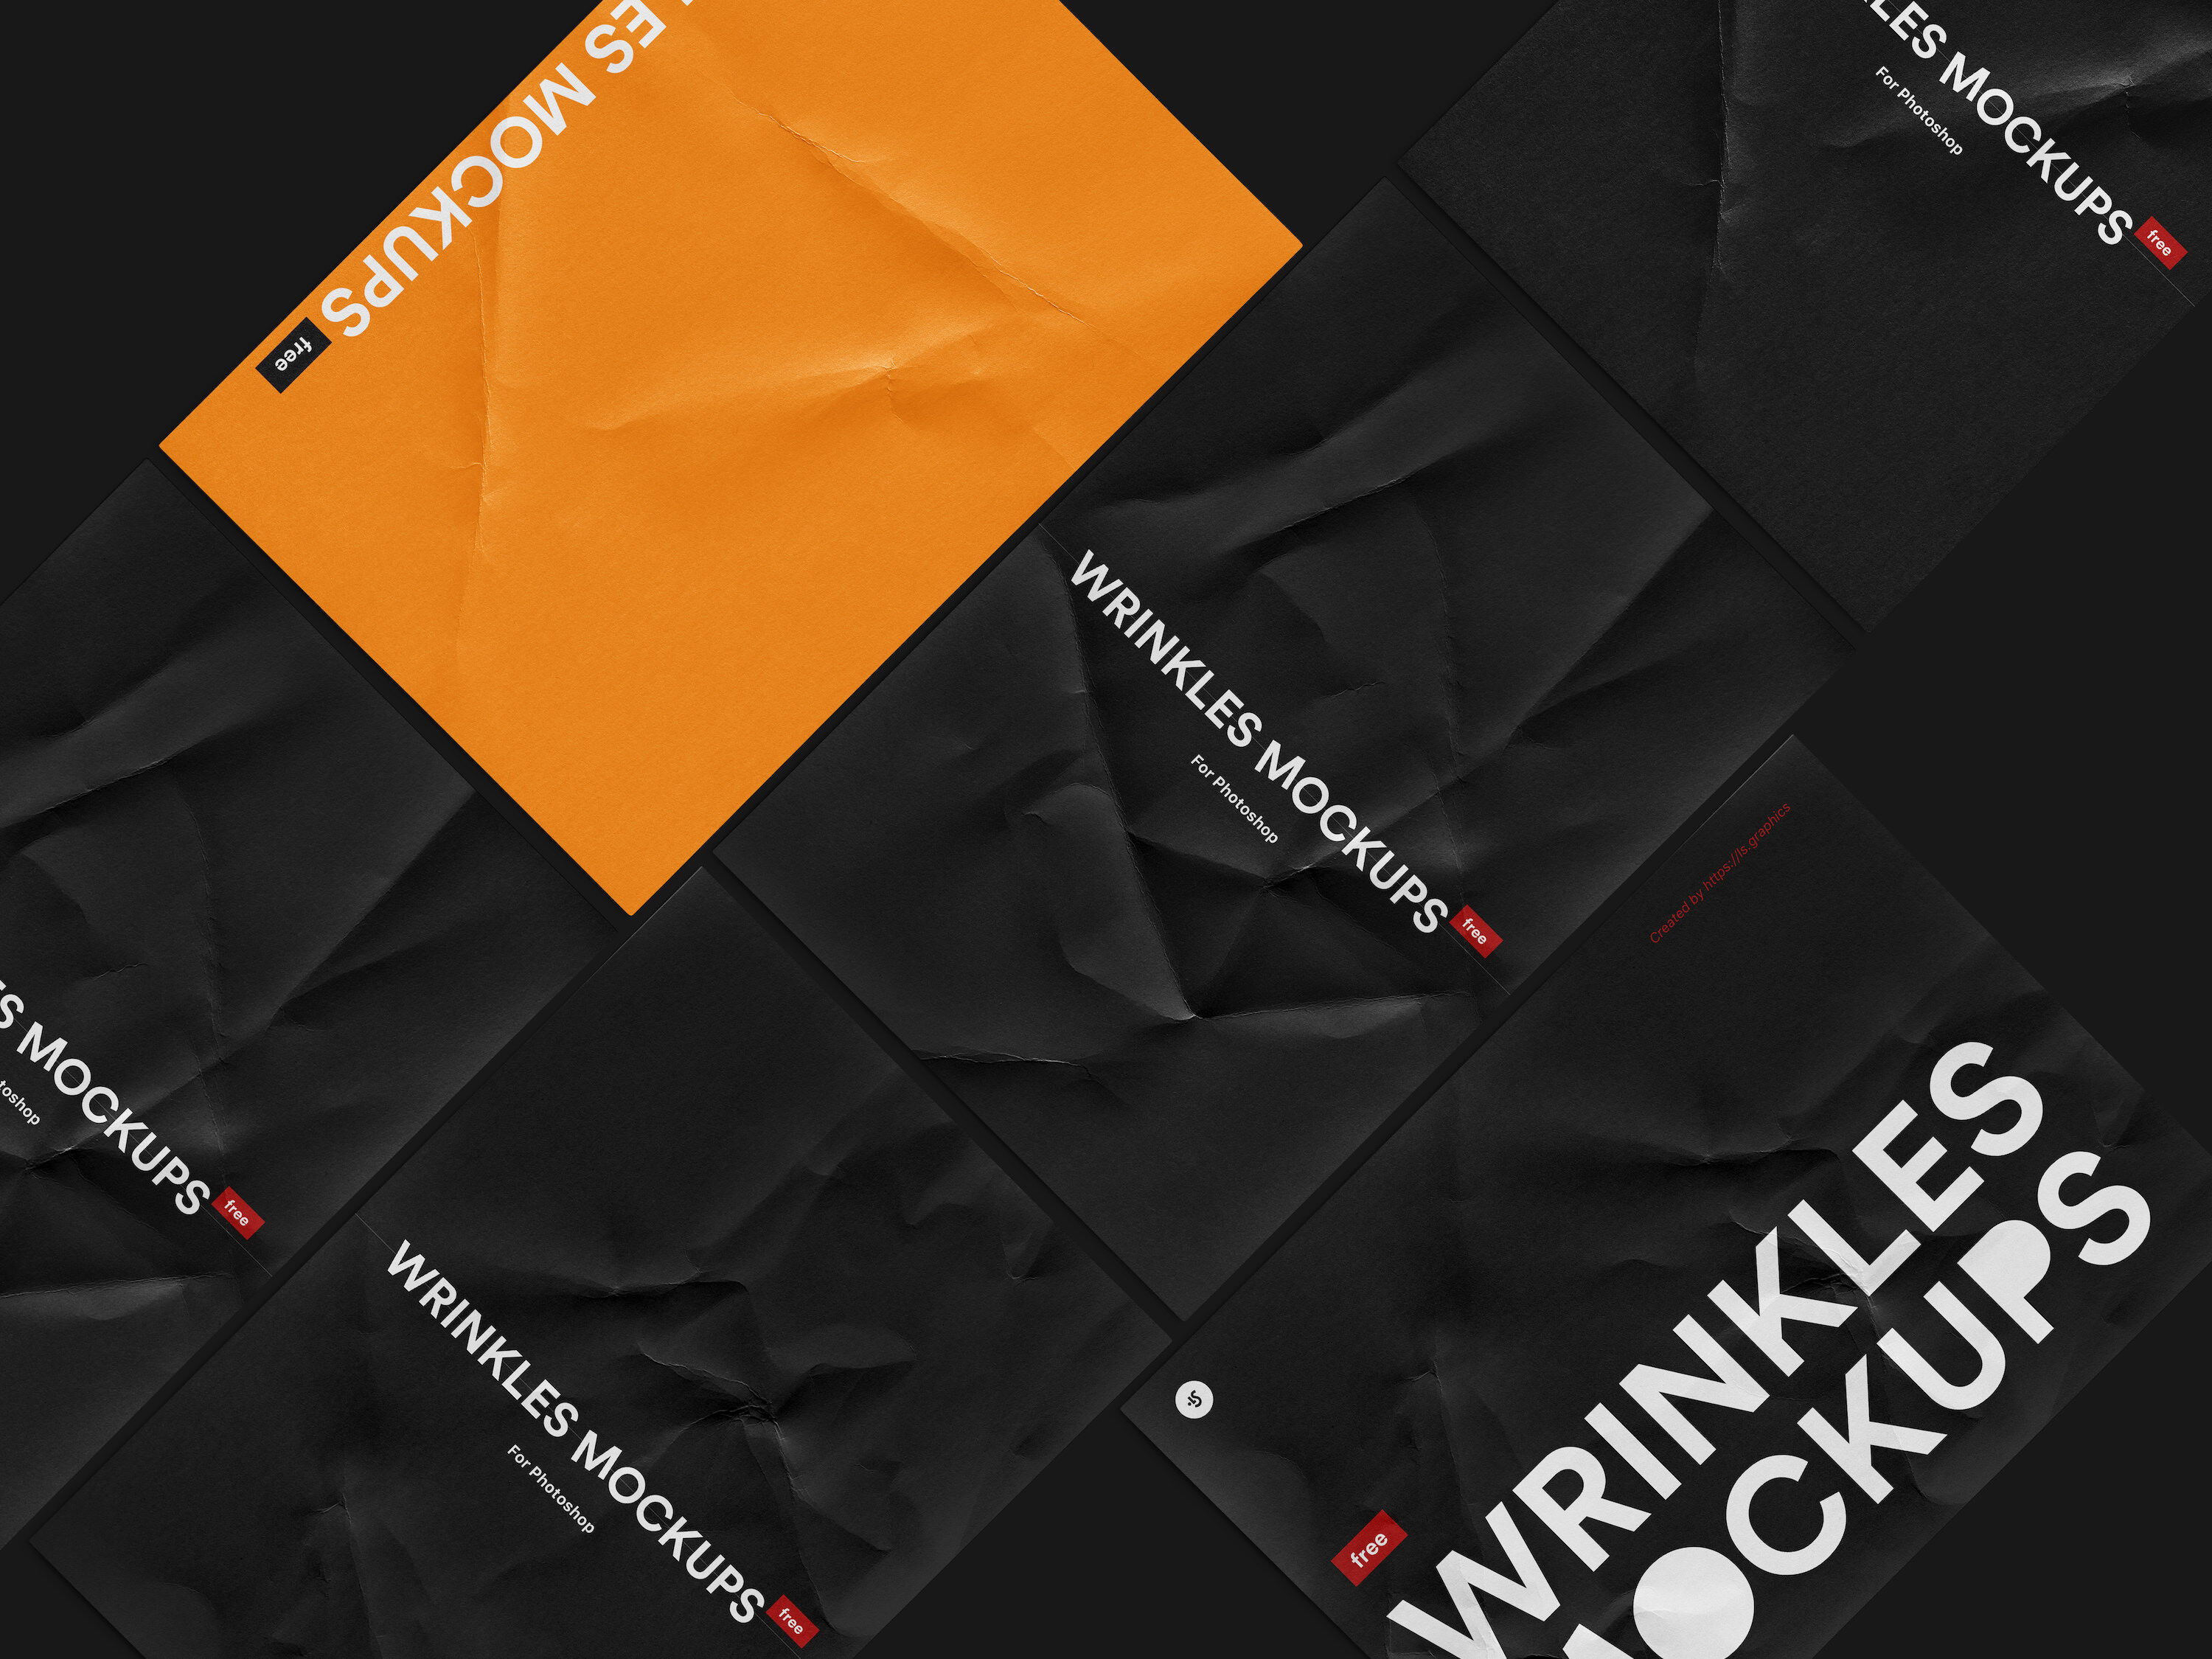 Mockup Showcasing Wrinkled Paper Various Positions FREE PSD